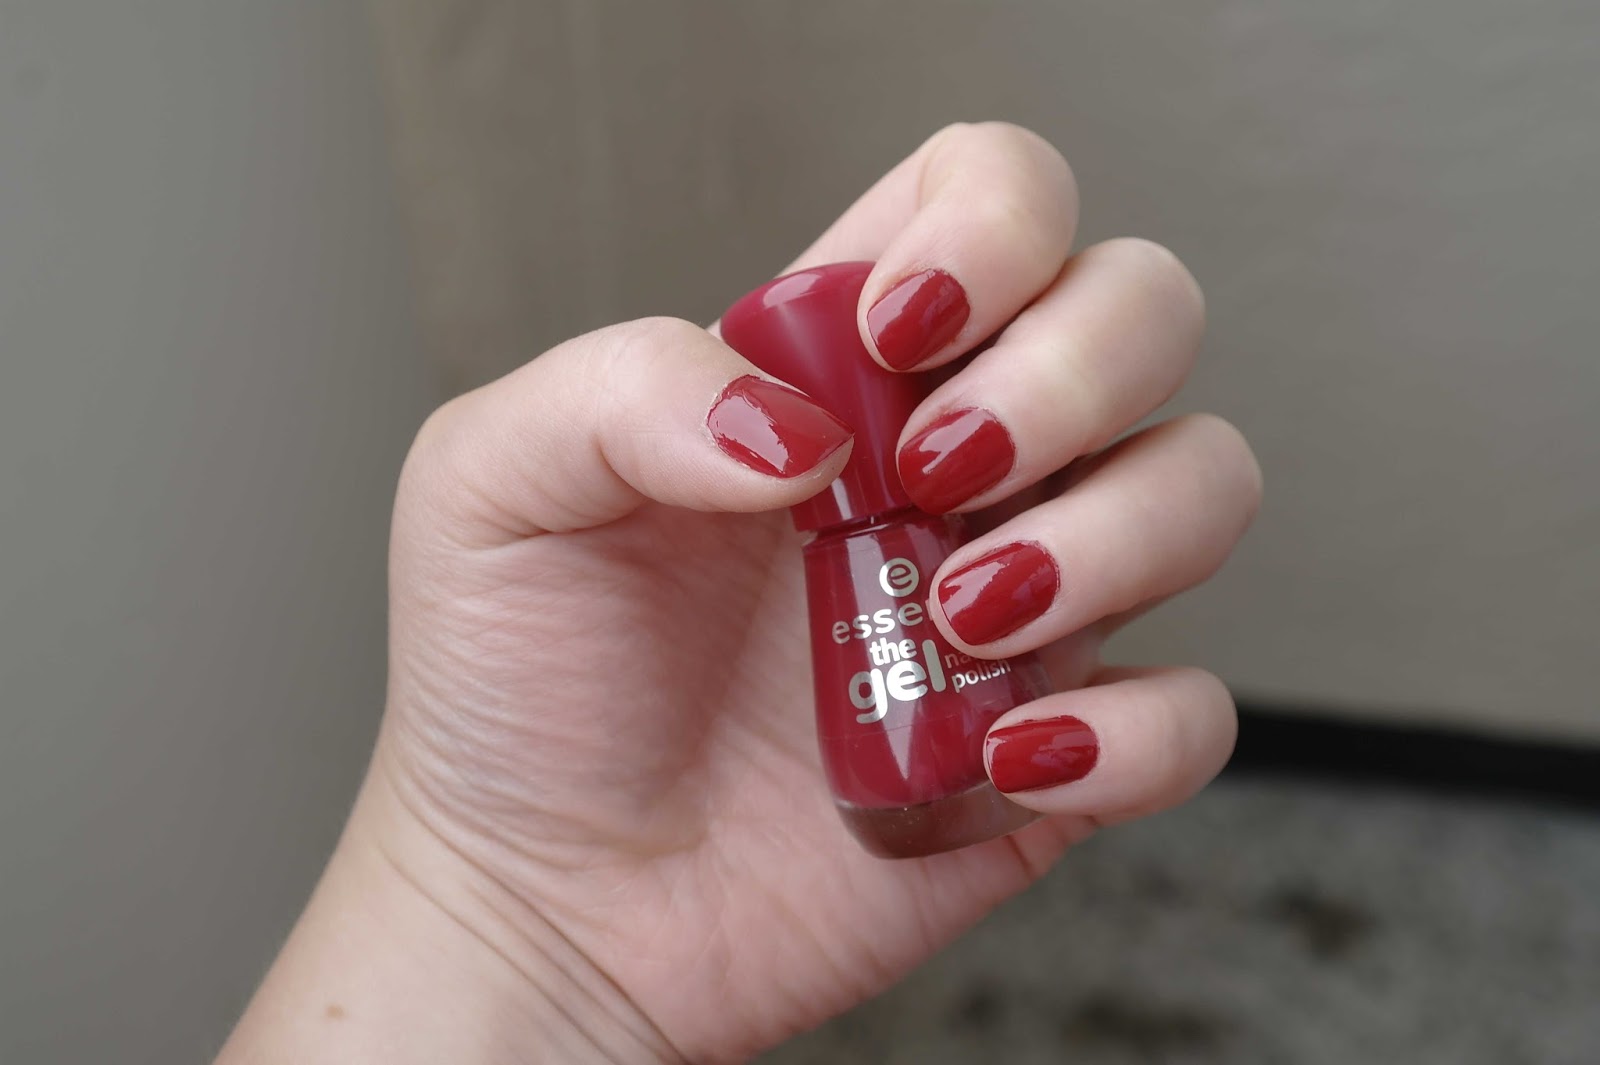 Dreamcatcher Essence The Gel Nail Polish In 13 True Love Late Polished Monday 14